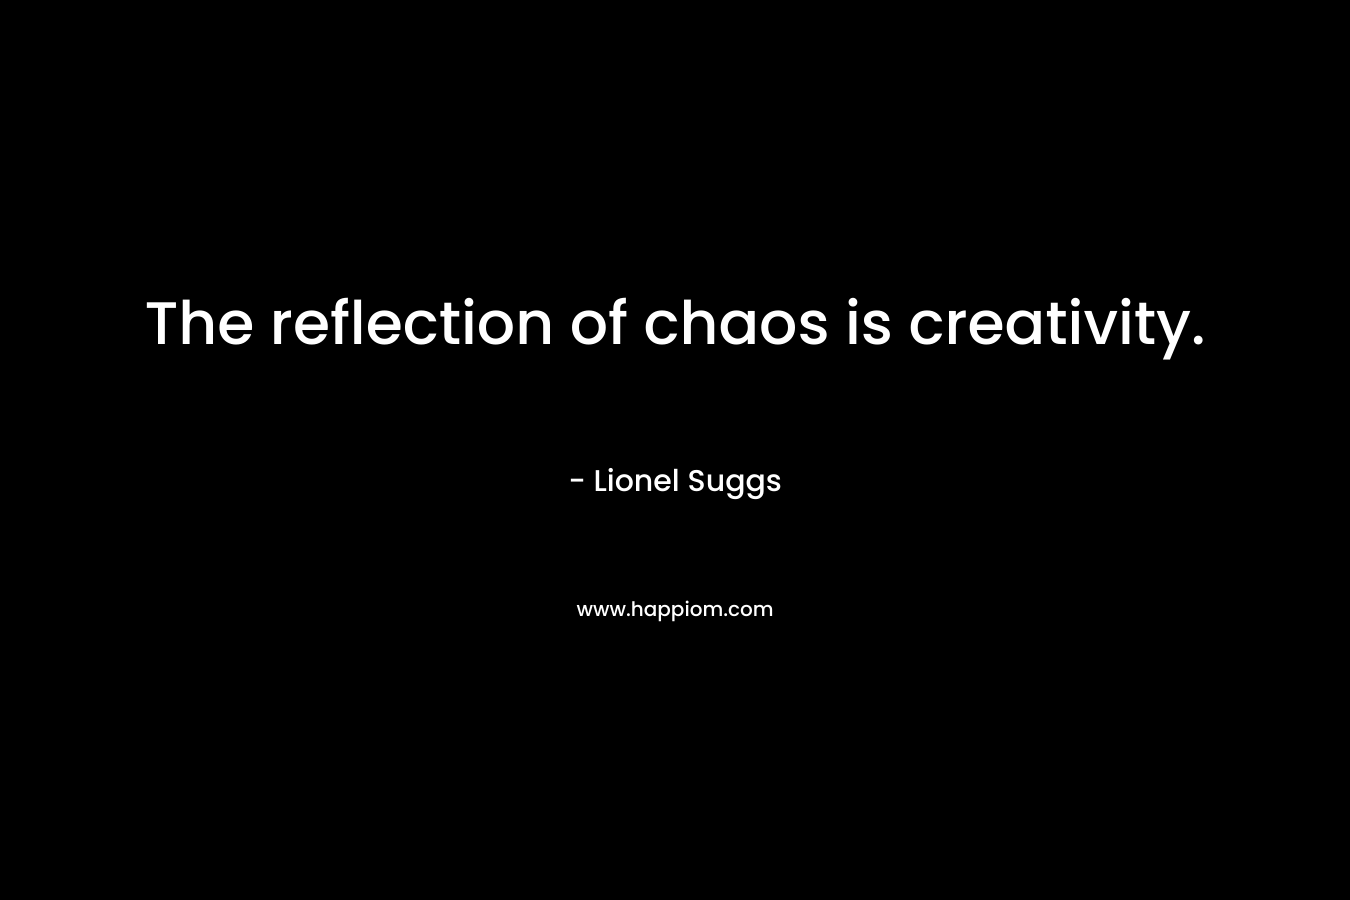 The reflection of chaos is creativity.